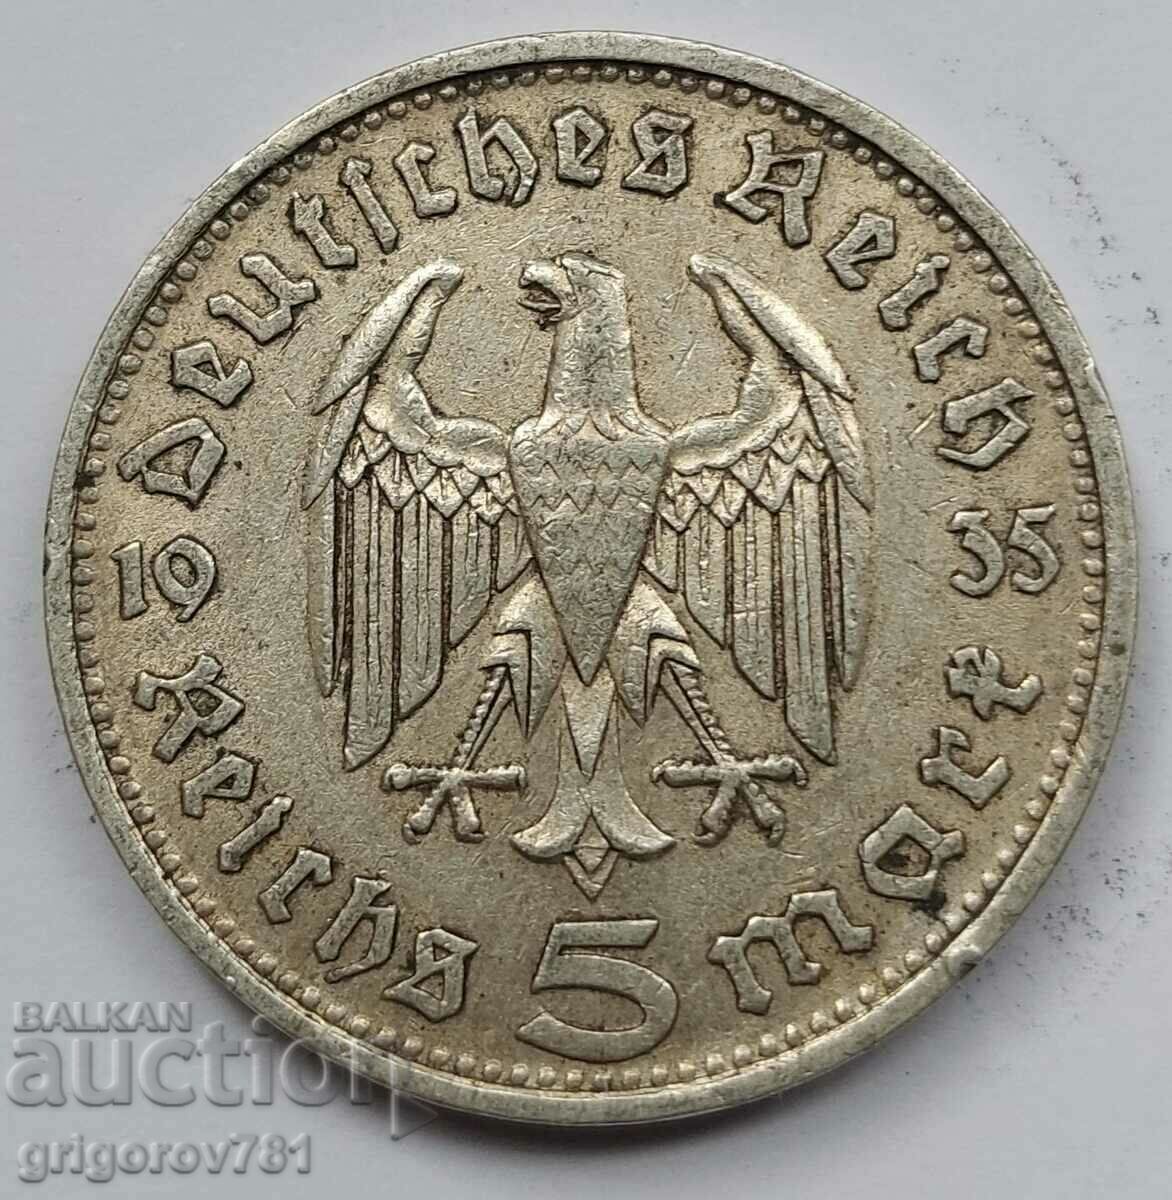 5 Mark Silver Germany 1935 D III Reich Silver Coin #66